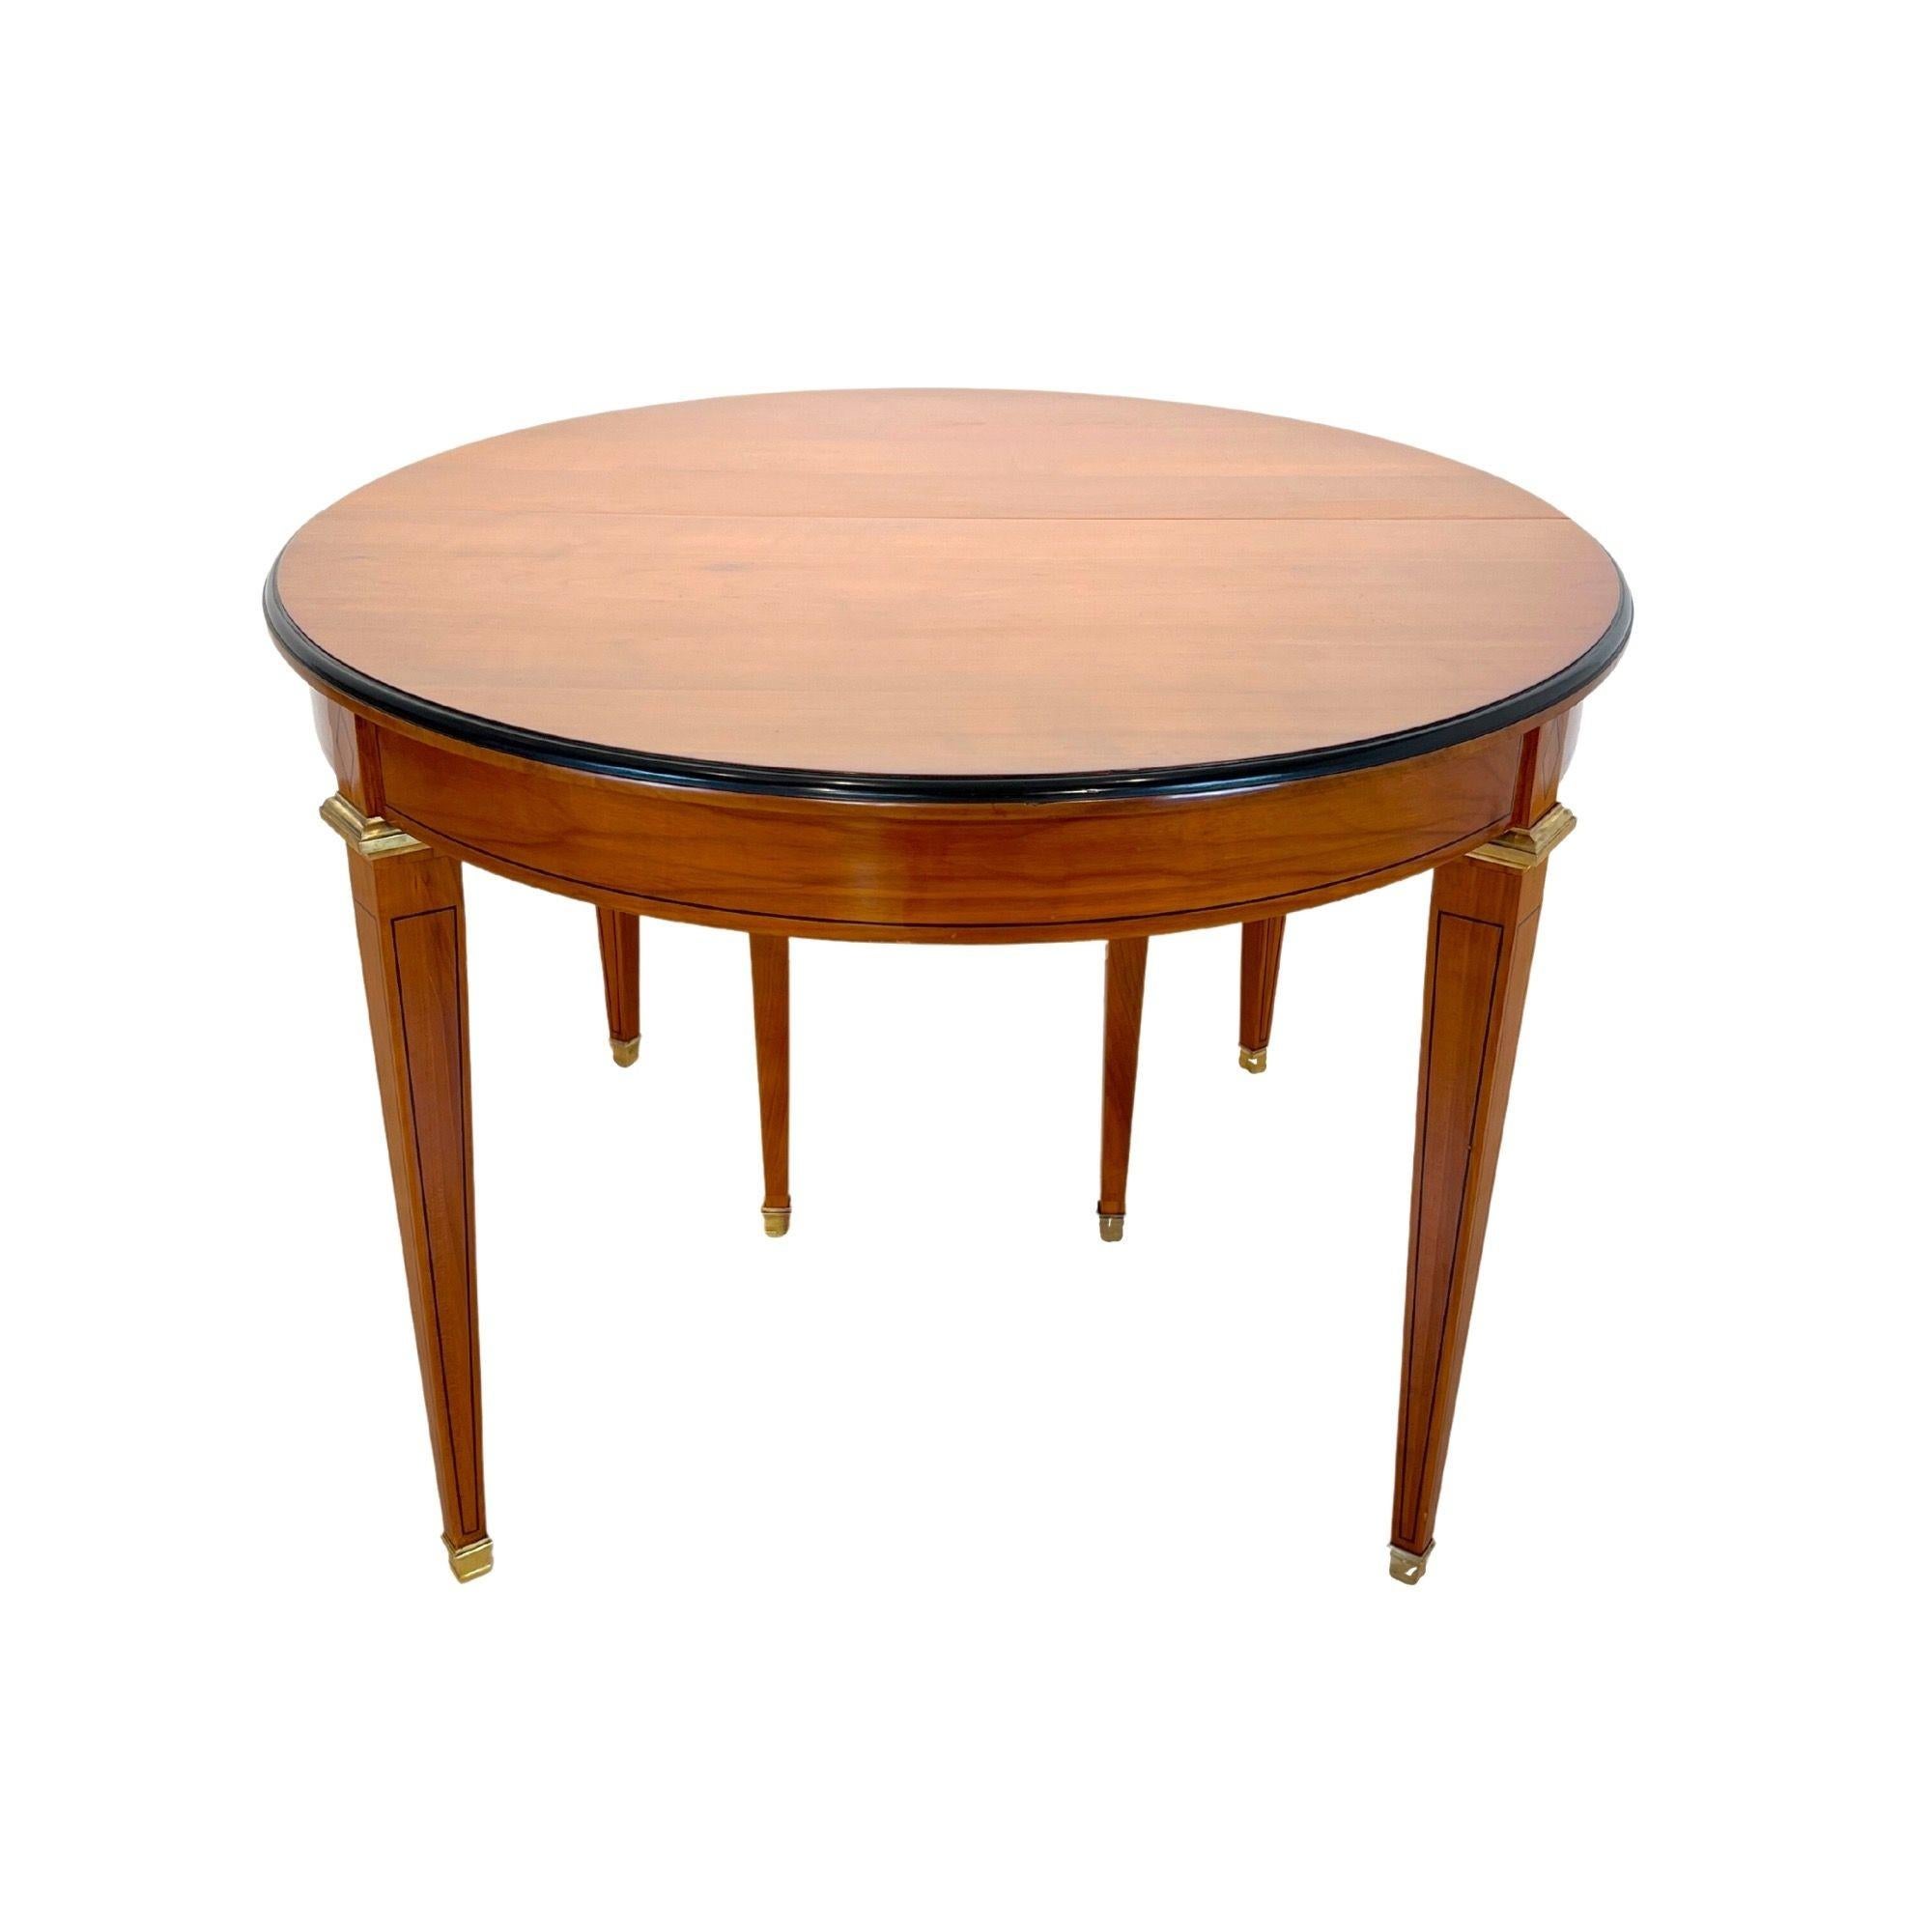 Late 19th / early 20th century Biedermeier / Restoration style expandable dining room table.
Solid oval cherry top, expandable with 3 inlay plates. Schellack hand polished.
Conical square tapered legs in cherry wood with ebony band inlays. Original